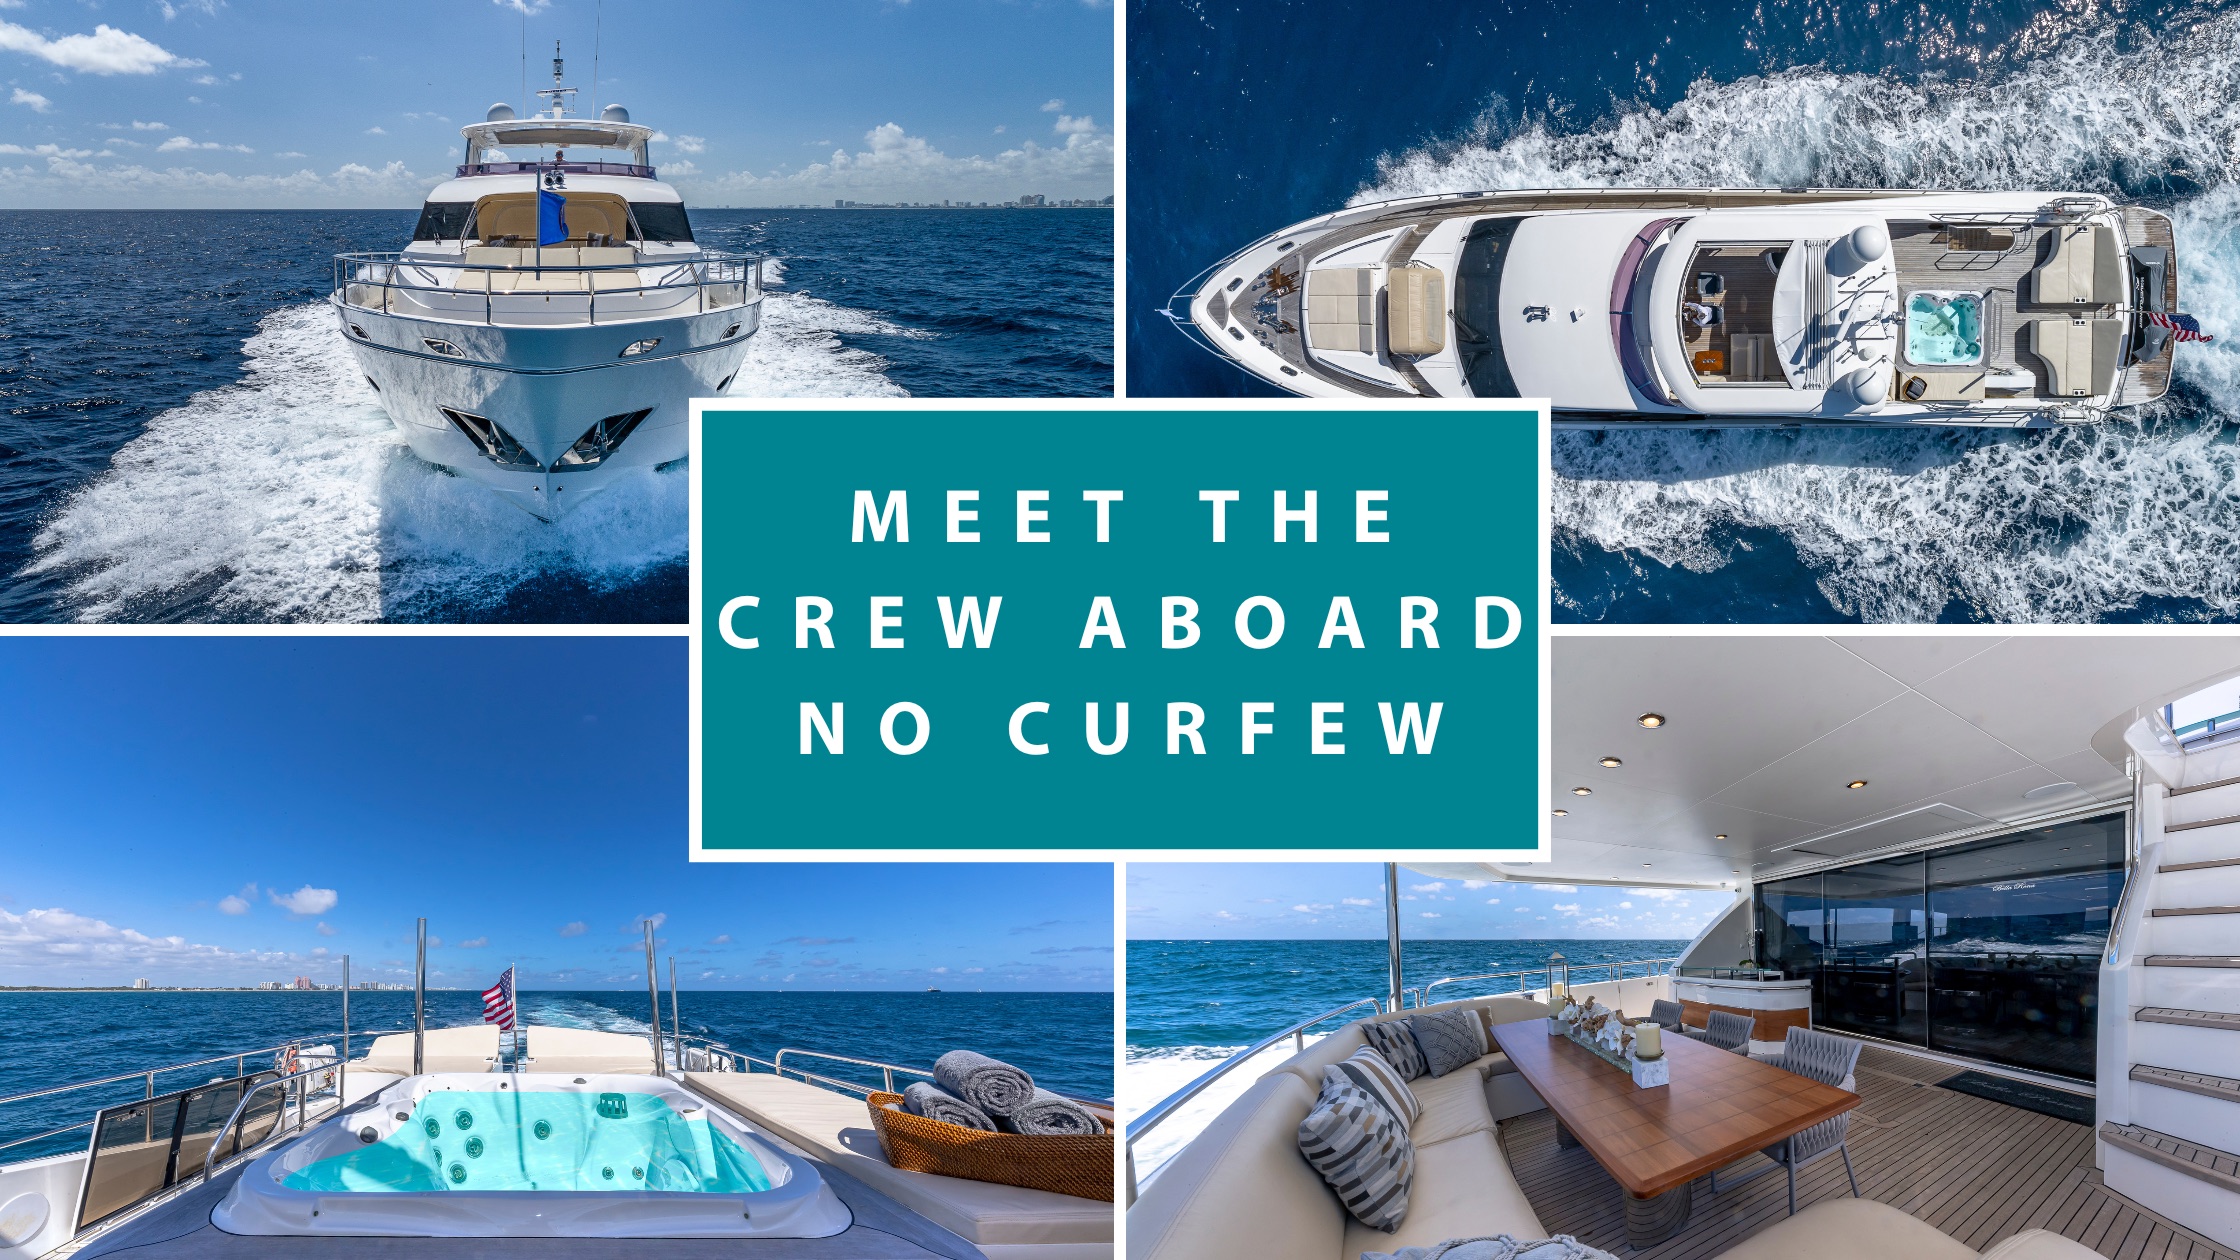 All Hands on Deck: How the Roles of Charter Crew Members Shape an Exquisite Guest Experience Aboard NO CURFEW